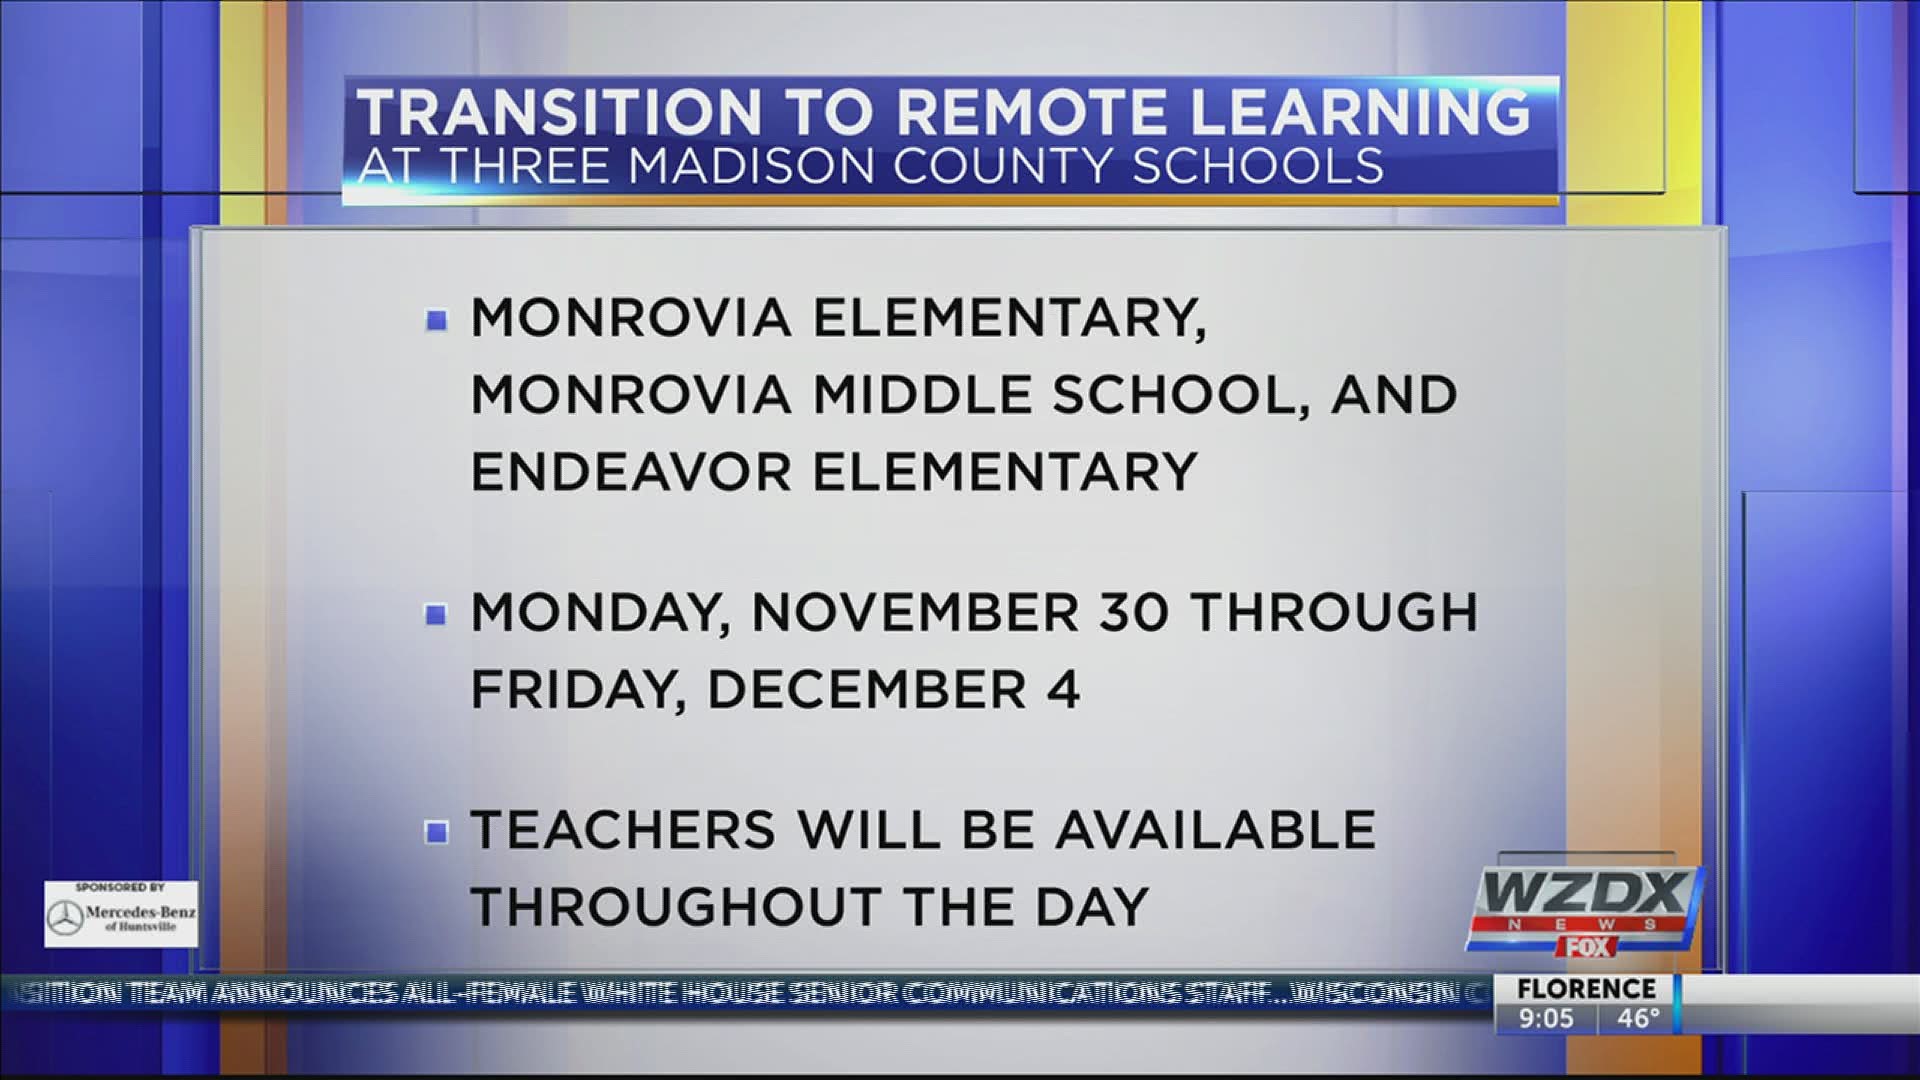 Madison County School Superintendent Mr. Allen Perkins announced the transition of three schools to remote learning.